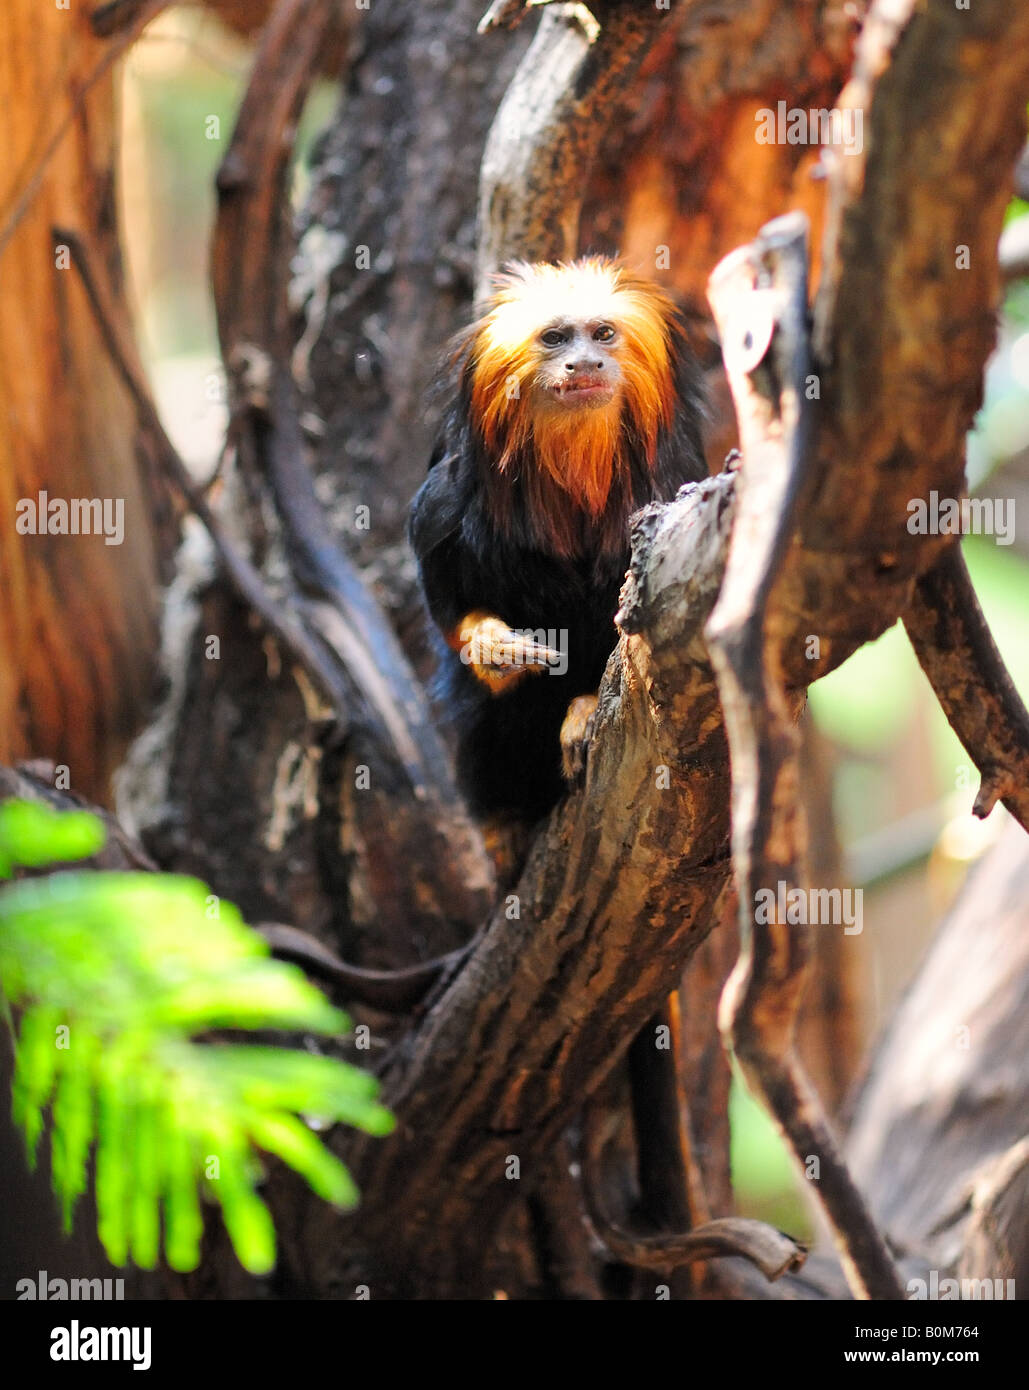 Golden Headed Lion Tamarin at London Zoo (EDITORIAL USE ONLY) Stock Photo